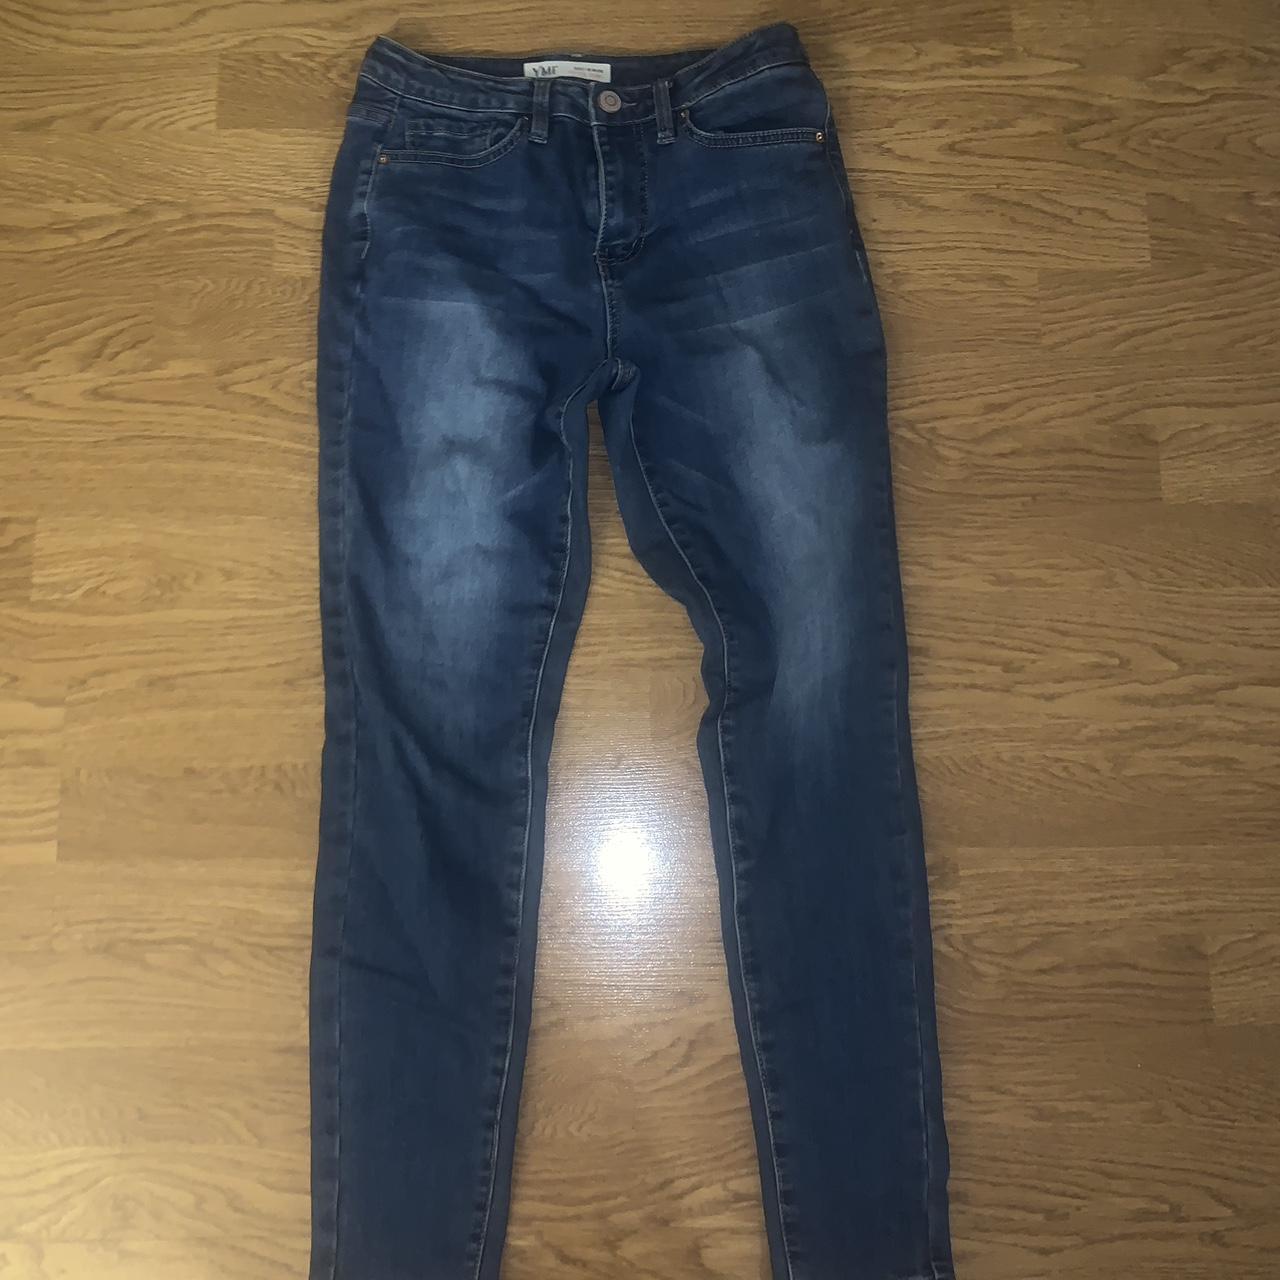 Winter skinny jeans Made to keep you warm!!... - Depop